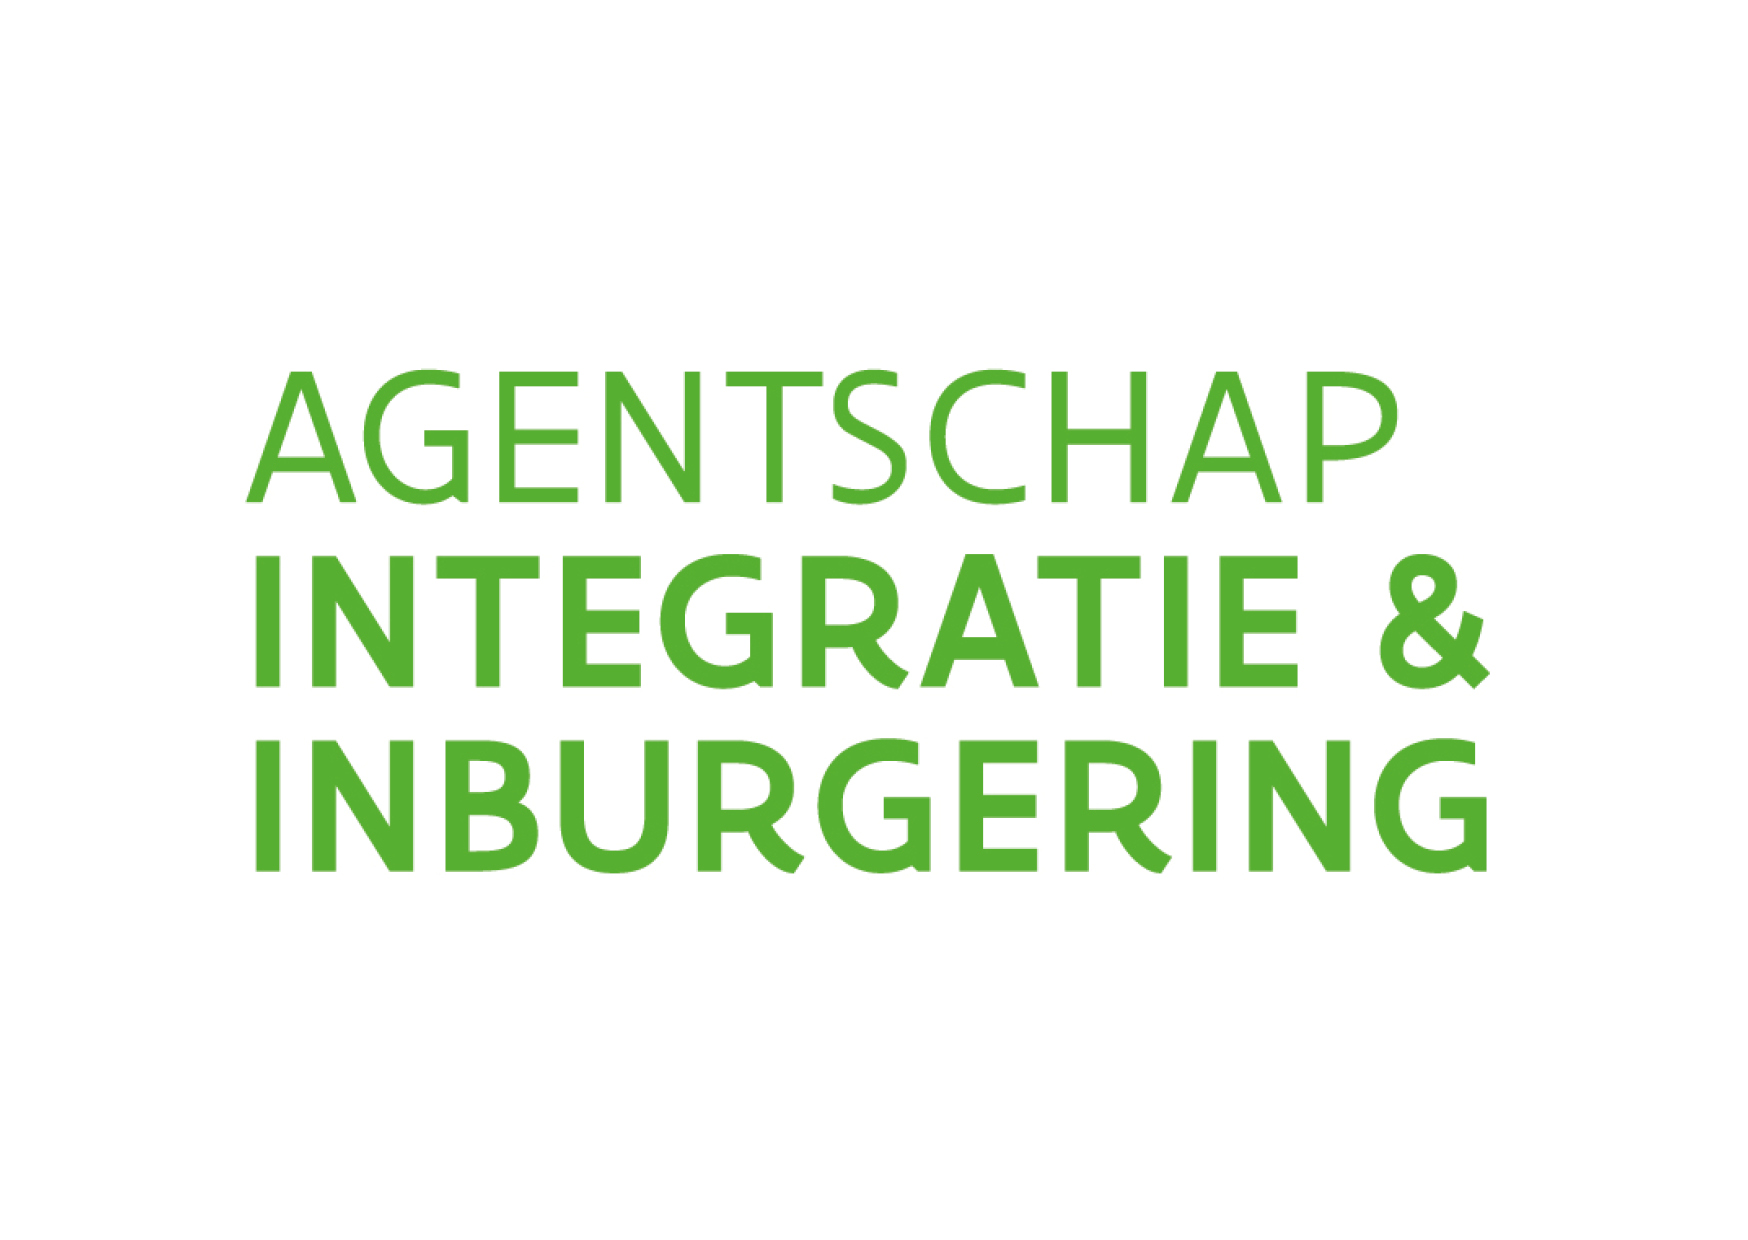 The Belgian Agency of Integration and Civic Orientation